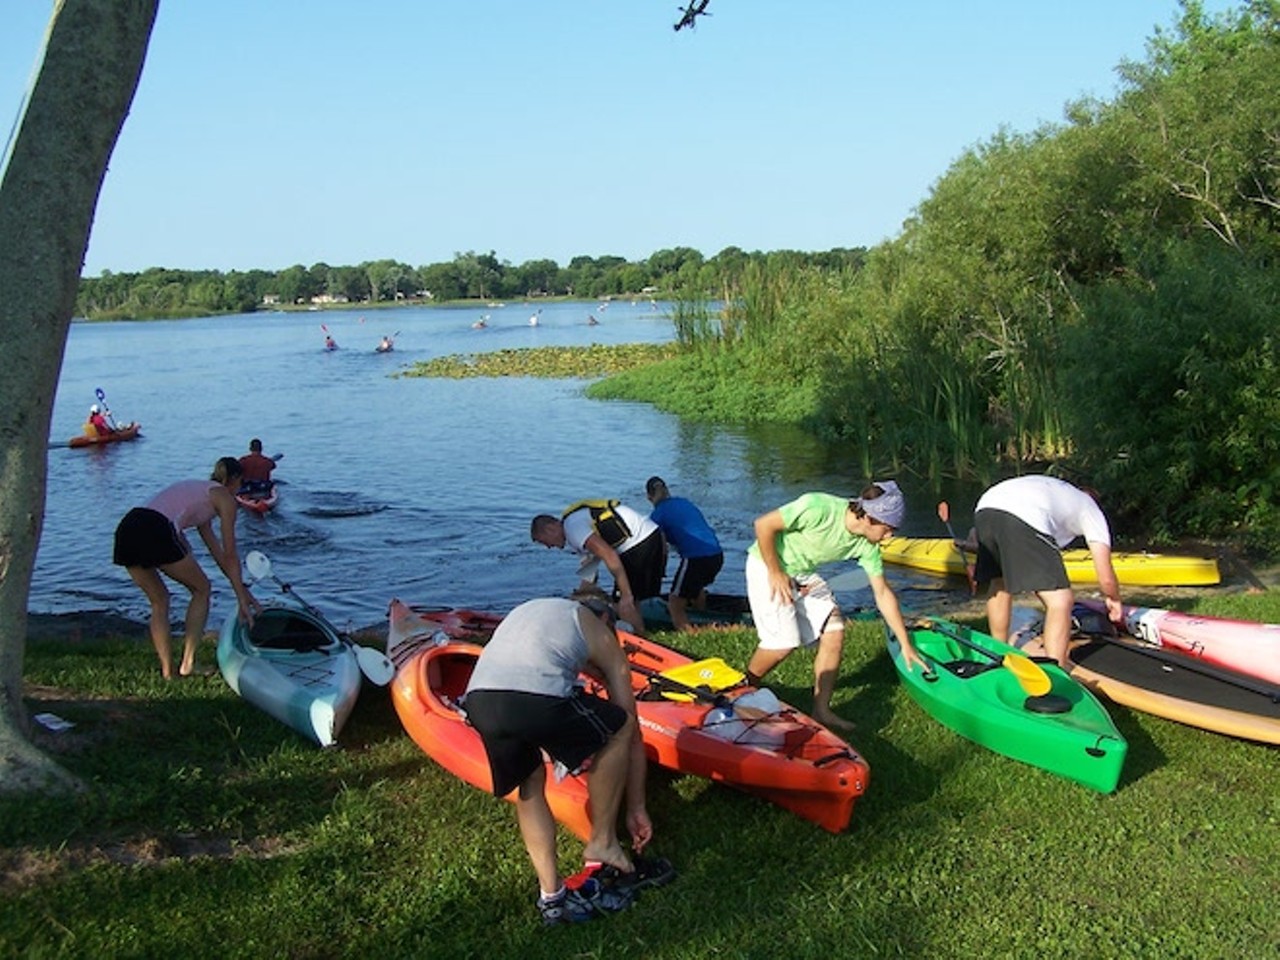 Saturday, Aug. 23RunYakHigh-energy, outdoor race with a 2.3K run, 3K paddle and another 2.3K run. Cash prizes for top finishers and prize raffle.